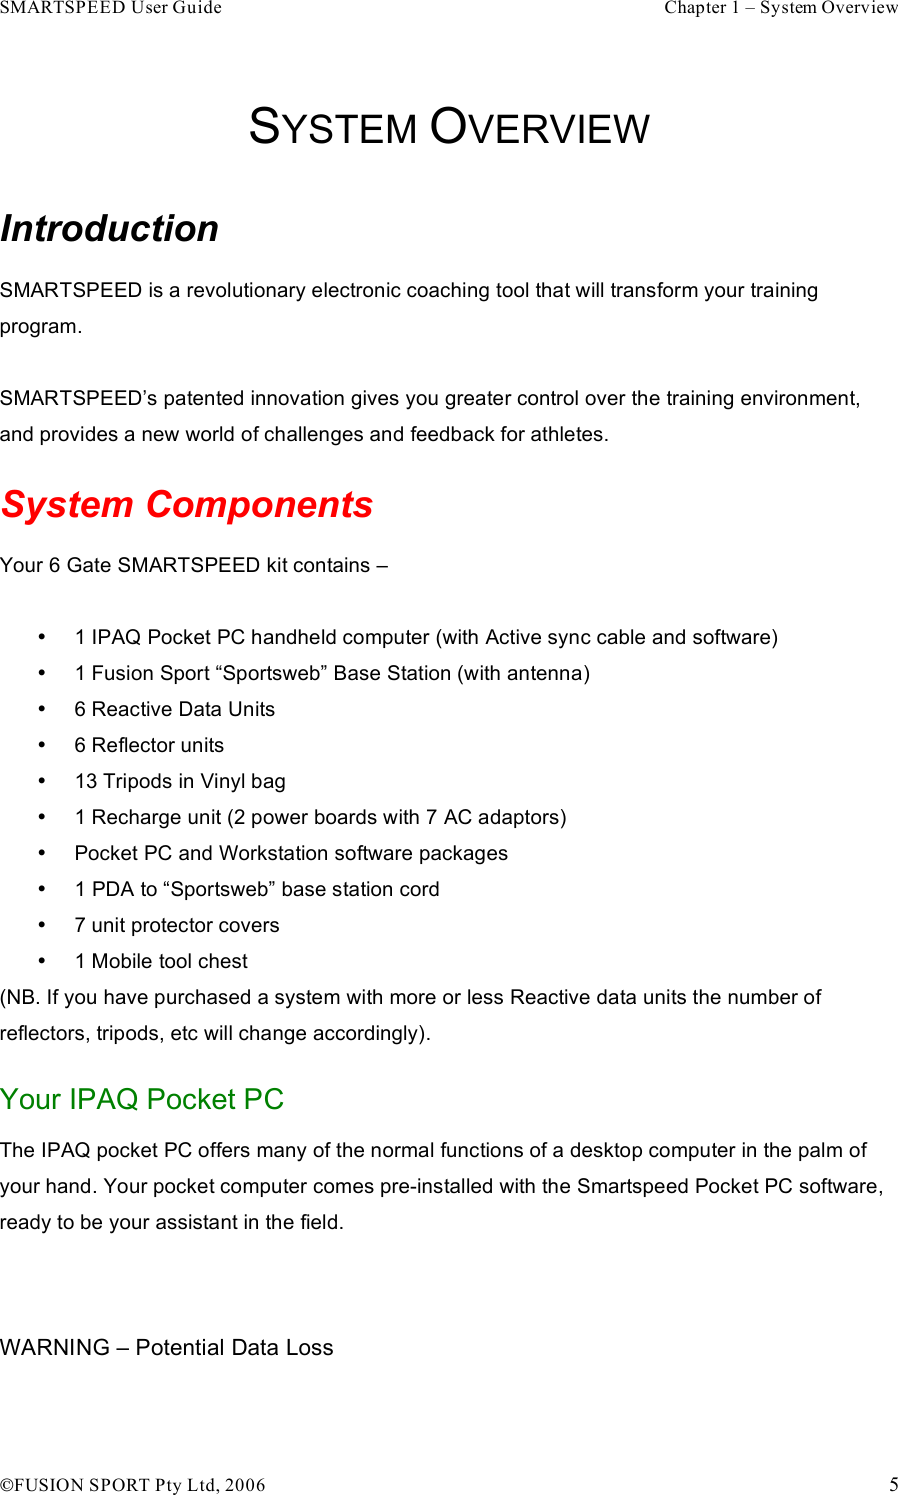 SMARTSPEED User Guide    Chapter 1 – System Overview !FUSION SPORT Pty Ltd, 2006    5  SYSTEM OVERVIEW Introduction SMARTSPEED is a revolutionary electronic coaching tool that will transform your training program.  SMARTSPEED’s patented innovation gives you greater control over the training environment, and provides a new world of challenges and feedback for athletes. System Components Your 6 Gate SMARTSPEED kit contains –   •  1 IPAQ Pocket PC handheld computer (with Active sync cable and software) •  1 Fusion Sport “Sportsweb” Base Station (with antenna) •  6 Reactive Data Units  •  6 Reflector units •  13 Tripods in Vinyl bag •  1 Recharge unit (2 power boards with 7 AC adaptors) •  Pocket PC and Workstation software packages •  1 PDA to “Sportsweb” base station cord •  7 unit protector covers •  1 Mobile tool chest (NB. If you have purchased a system with more or less Reactive data units the number of reflectors, tripods, etc will change accordingly).  Your IPAQ Pocket PC The IPAQ pocket PC offers many of the normal functions of a desktop computer in the palm of your hand. Your pocket computer comes pre-installed with the Smartspeed Pocket PC software, ready to be your assistant in the field.   WARNING – Potential Data Loss 